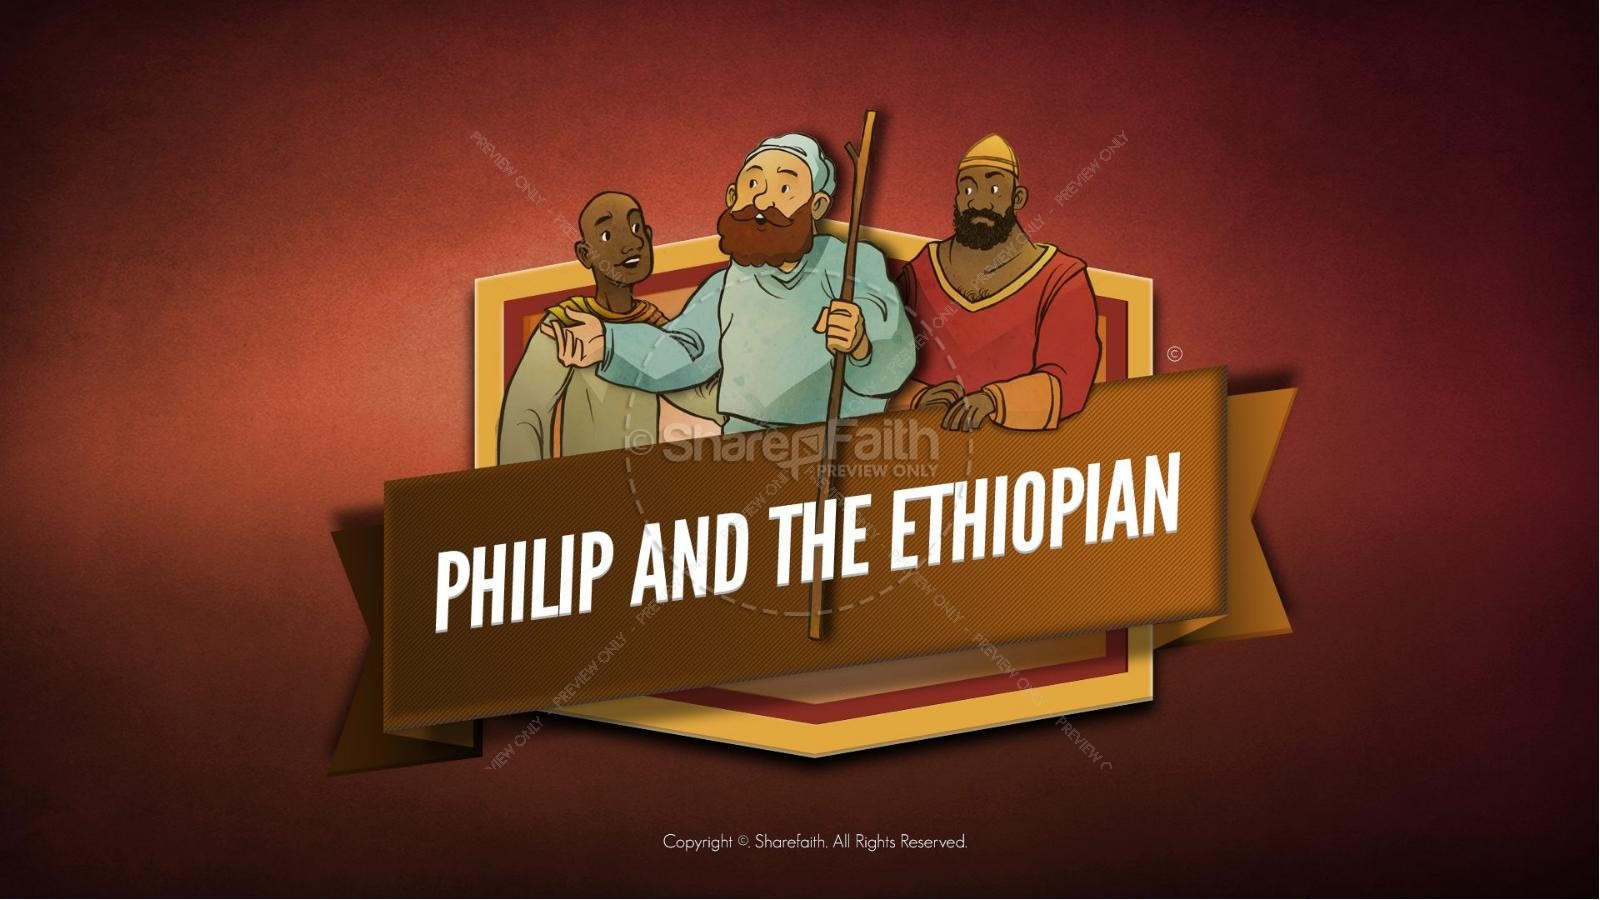 Free Coloring Pages Philip And The Ethiopian Acts 8 Philip And The Ethiopian Bible Video For Kids Bible Videos